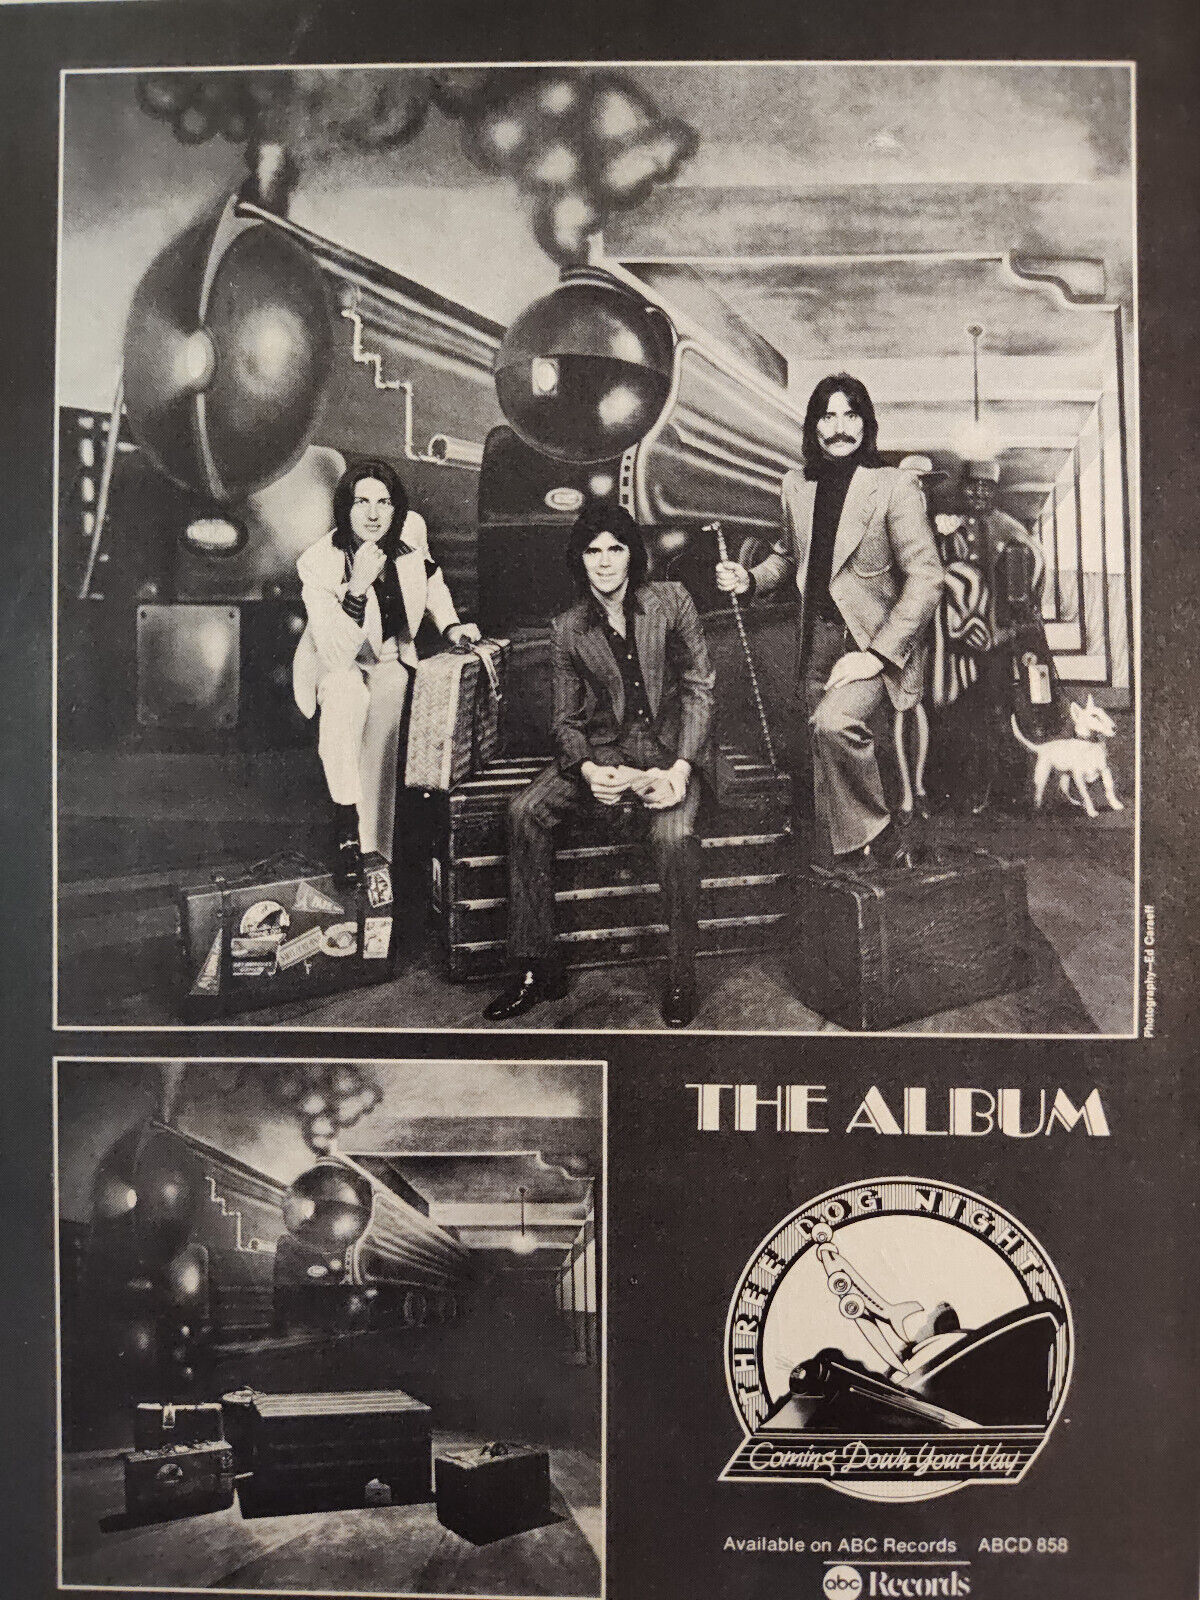 Vintage Ad Advertisement THREE DOG NIGHT New Album Coming Down Your Way